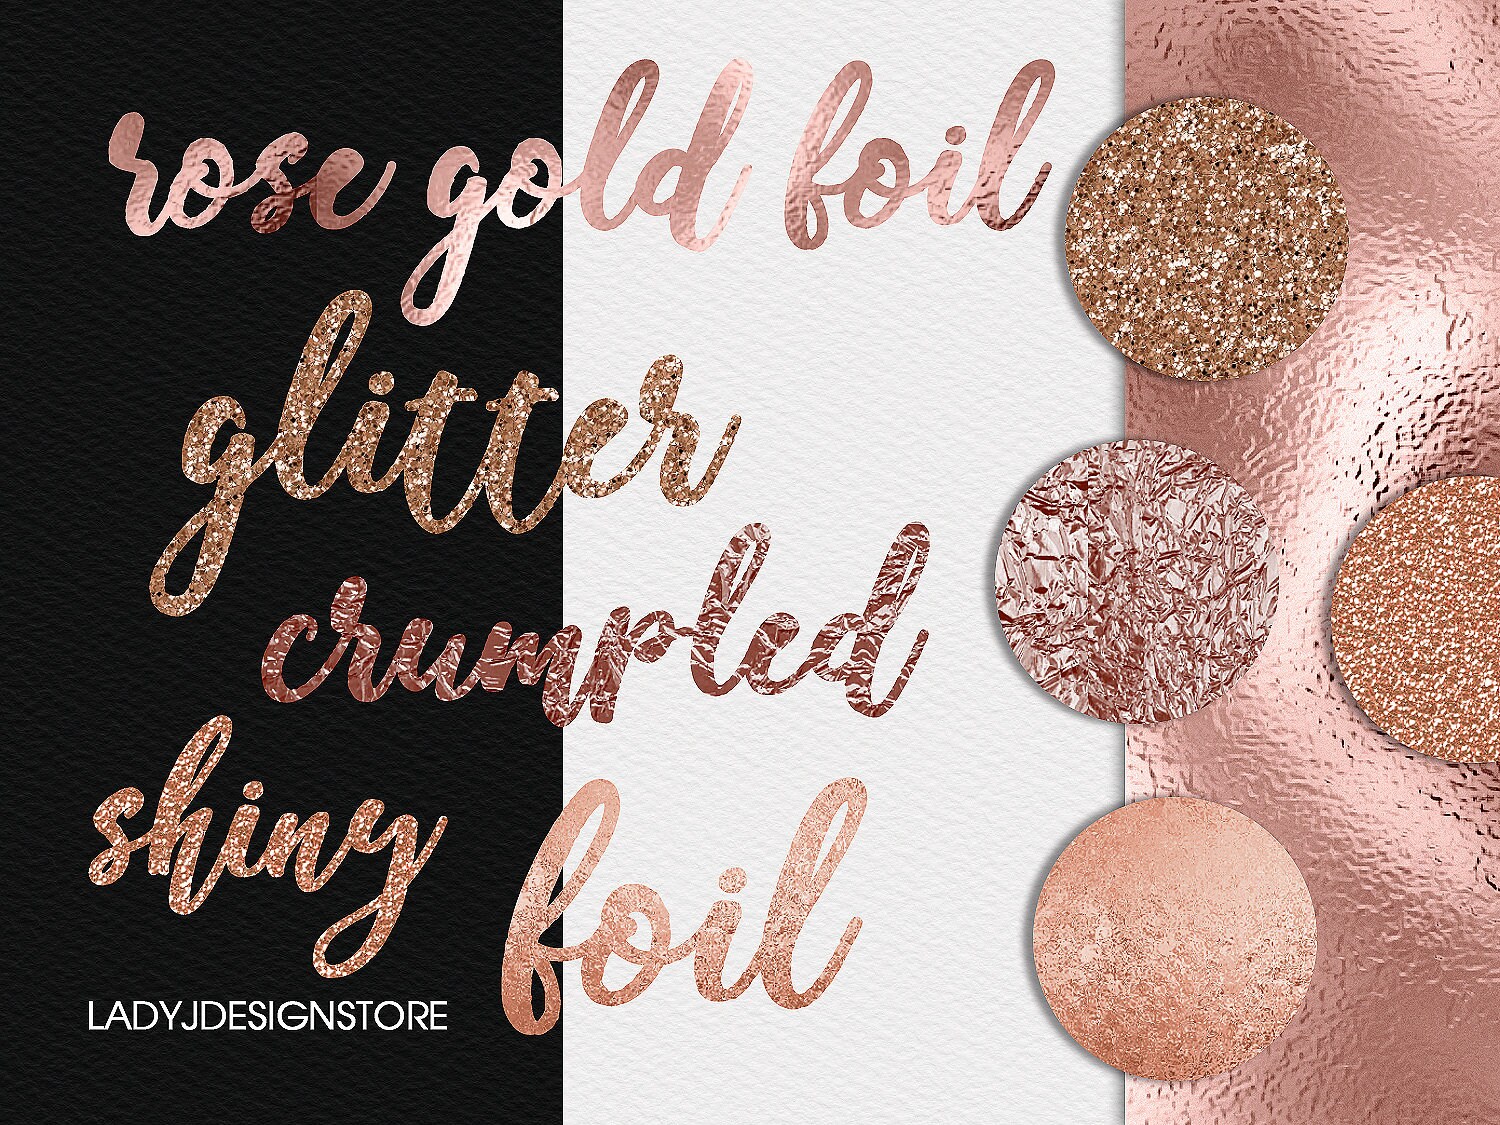 Rose gold confetti glitter - transparent background Postcard for Sale by  peggieprints